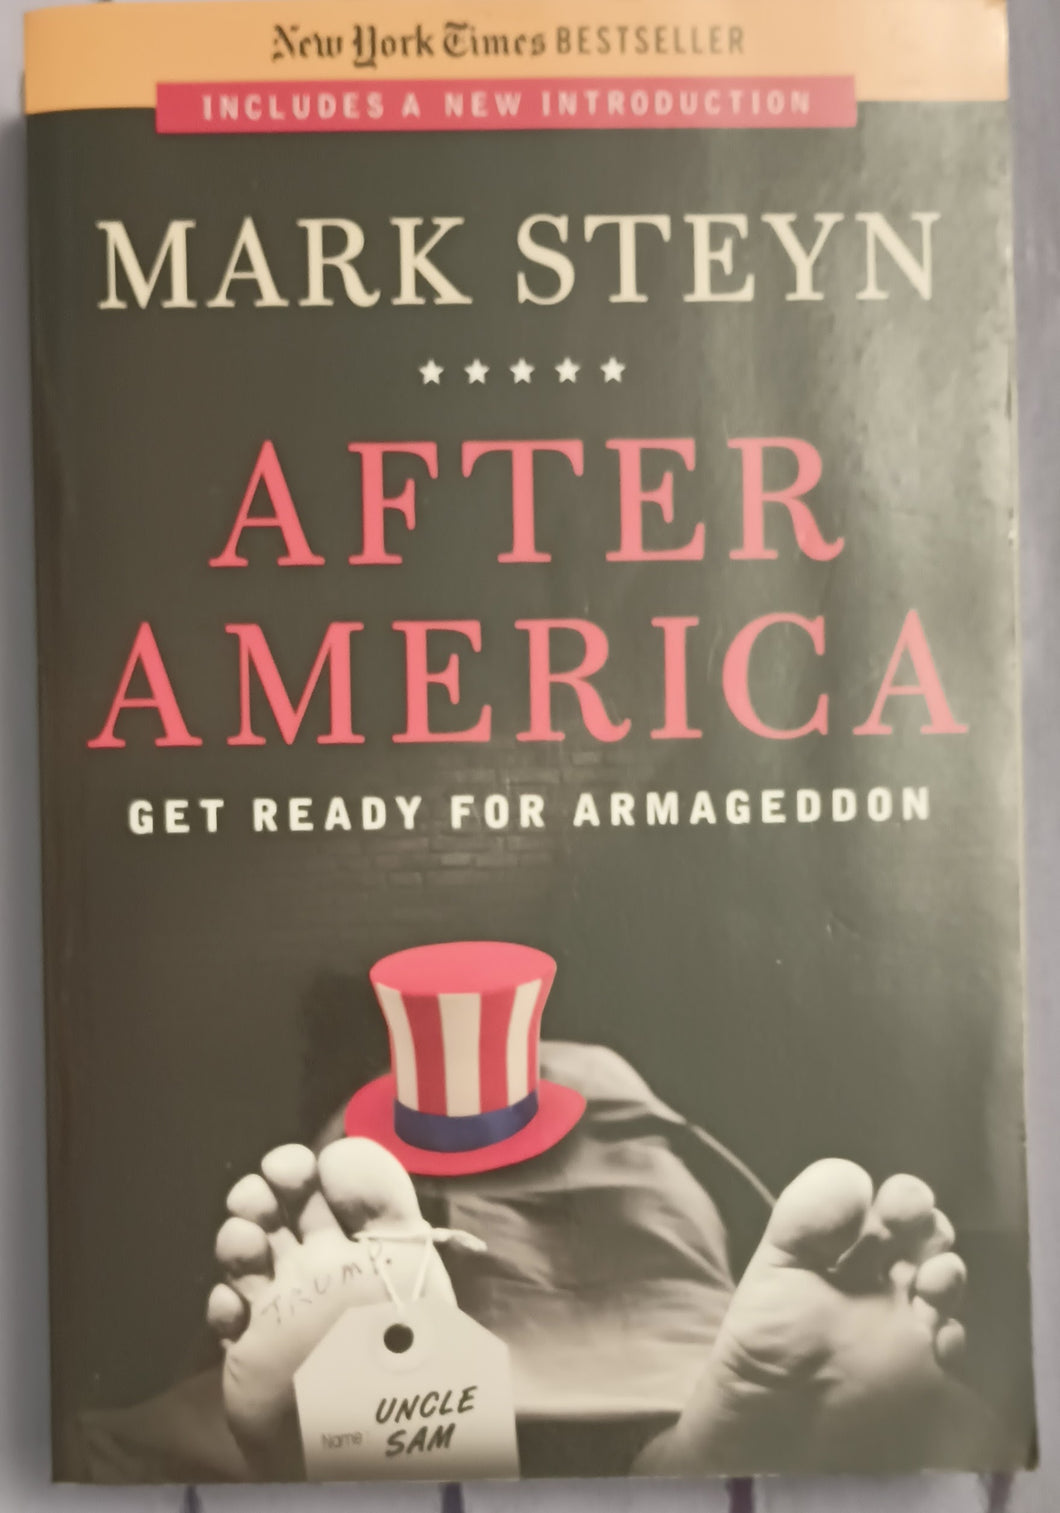 After America - Get Ready for Armageddon